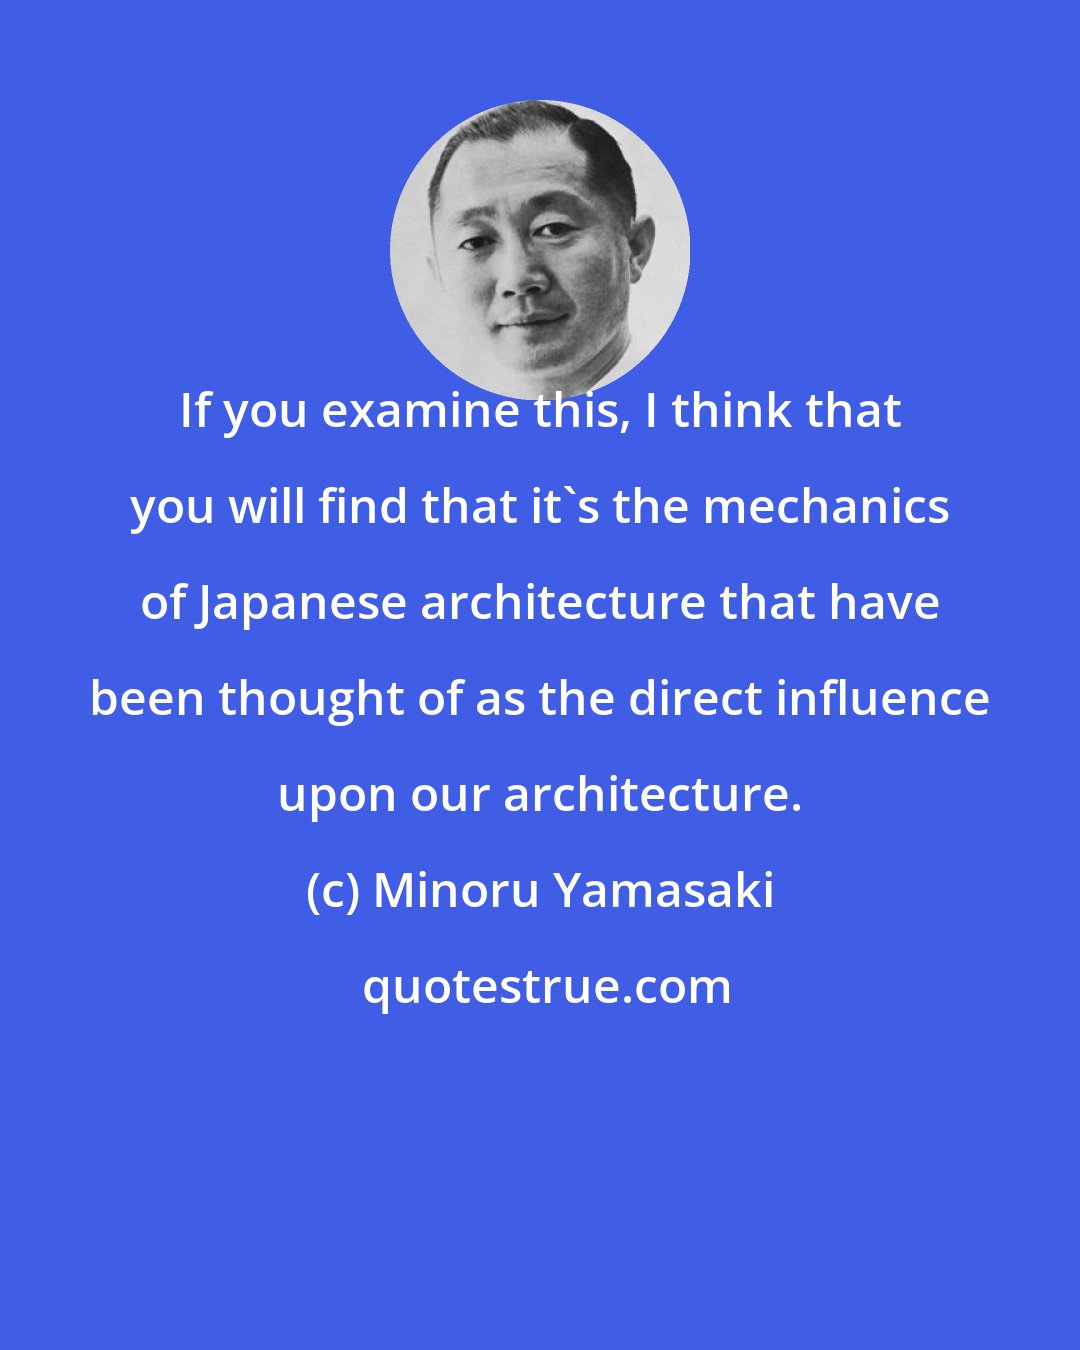 Minoru Yamasaki: If you examine this, I think that you will find that it's the mechanics of Japanese architecture that have been thought of as the direct influence upon our architecture.